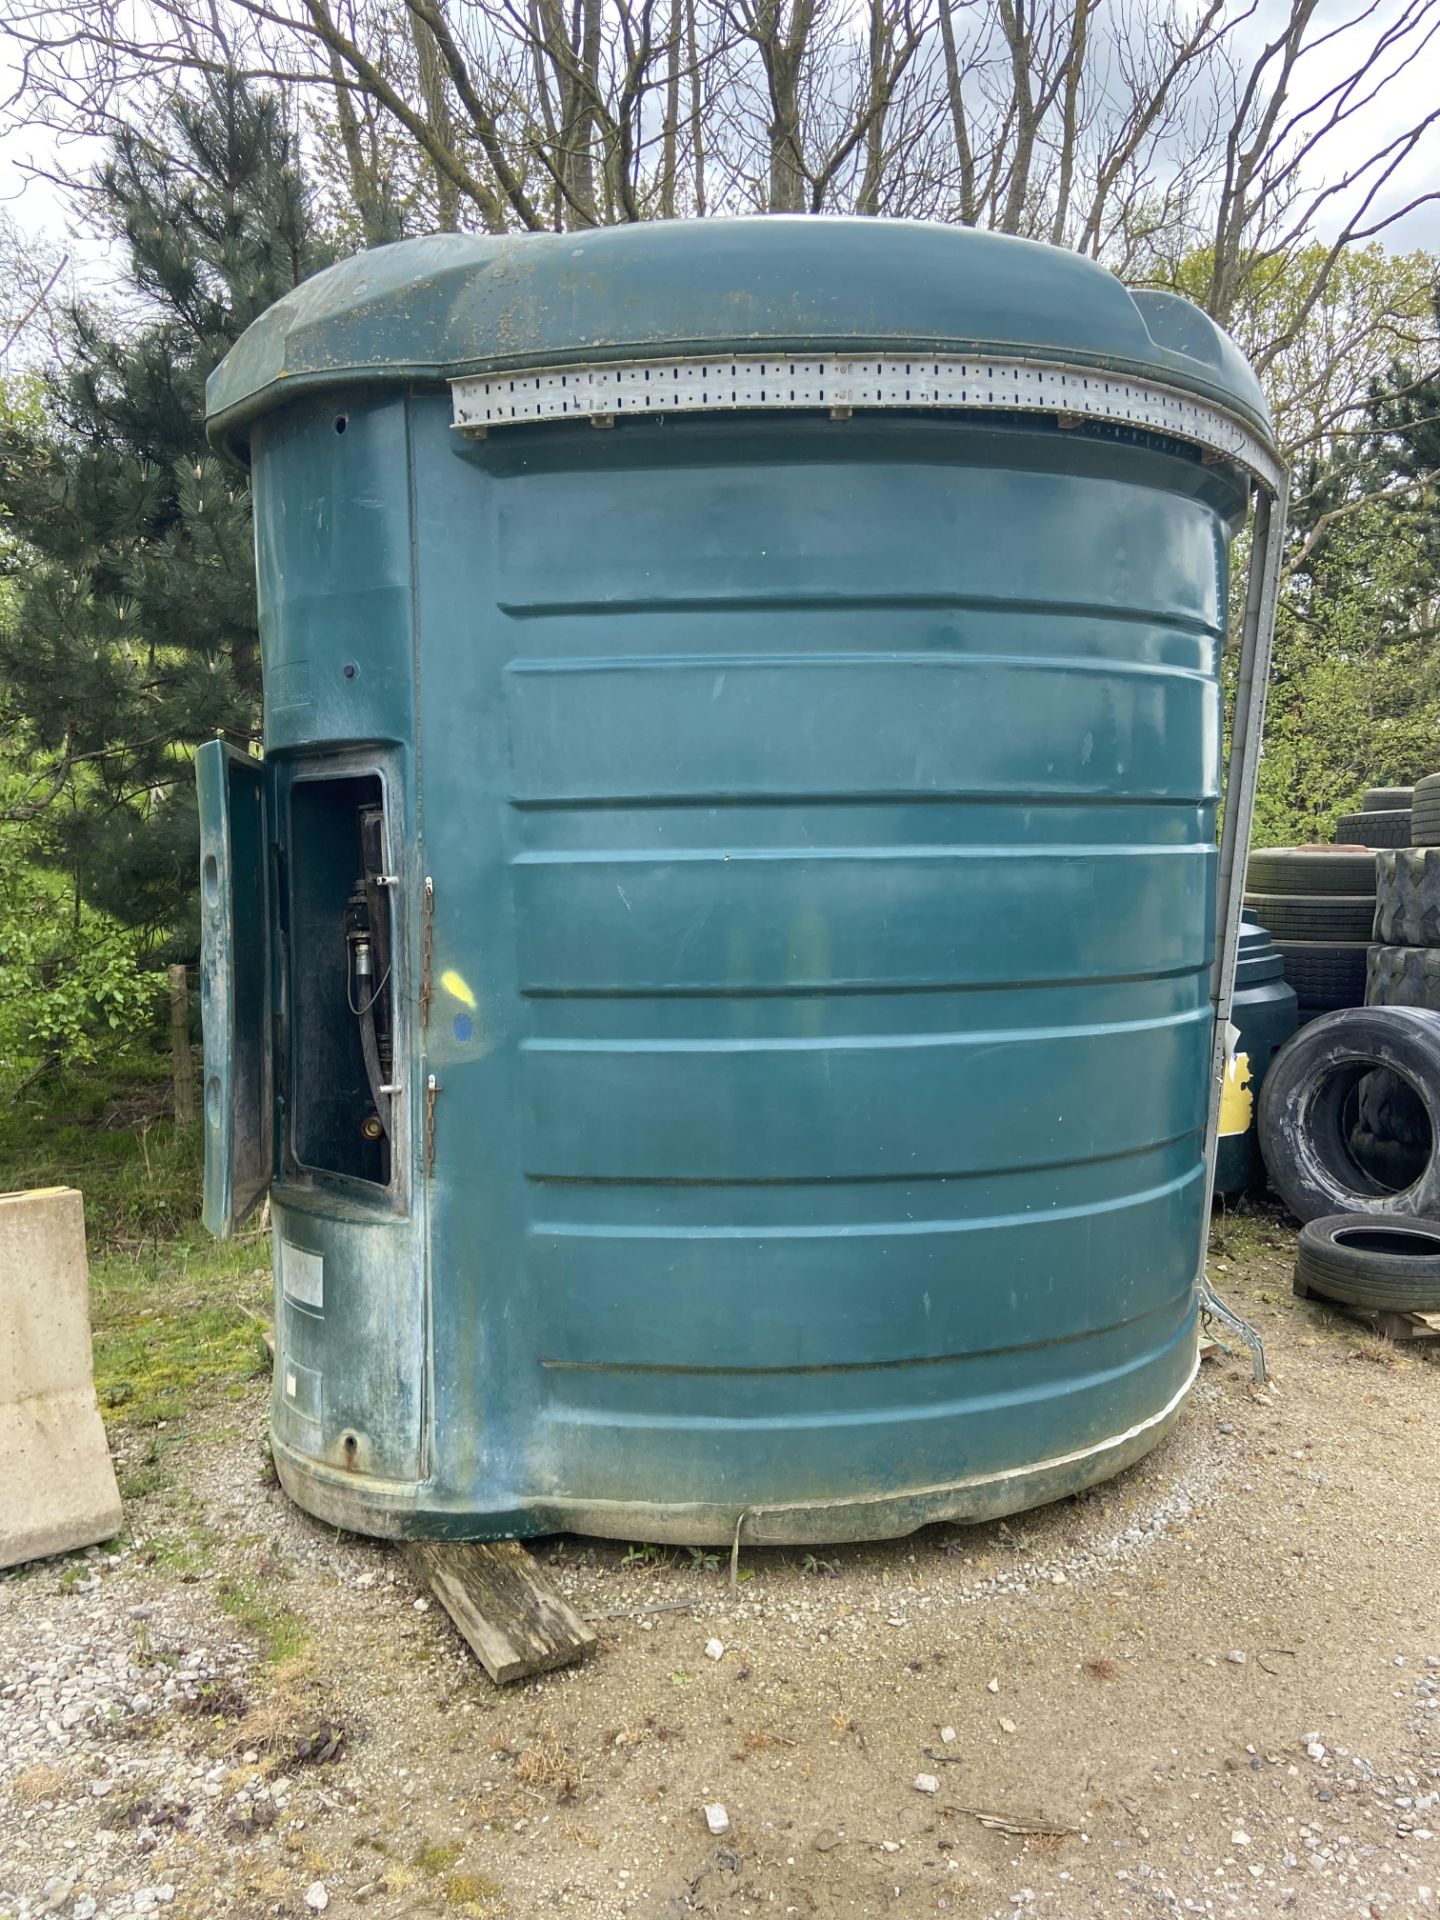 Bunded Plastic Diesel Storage Tank, approx. 2.9m high, with fuel dispensing unit, lot located in